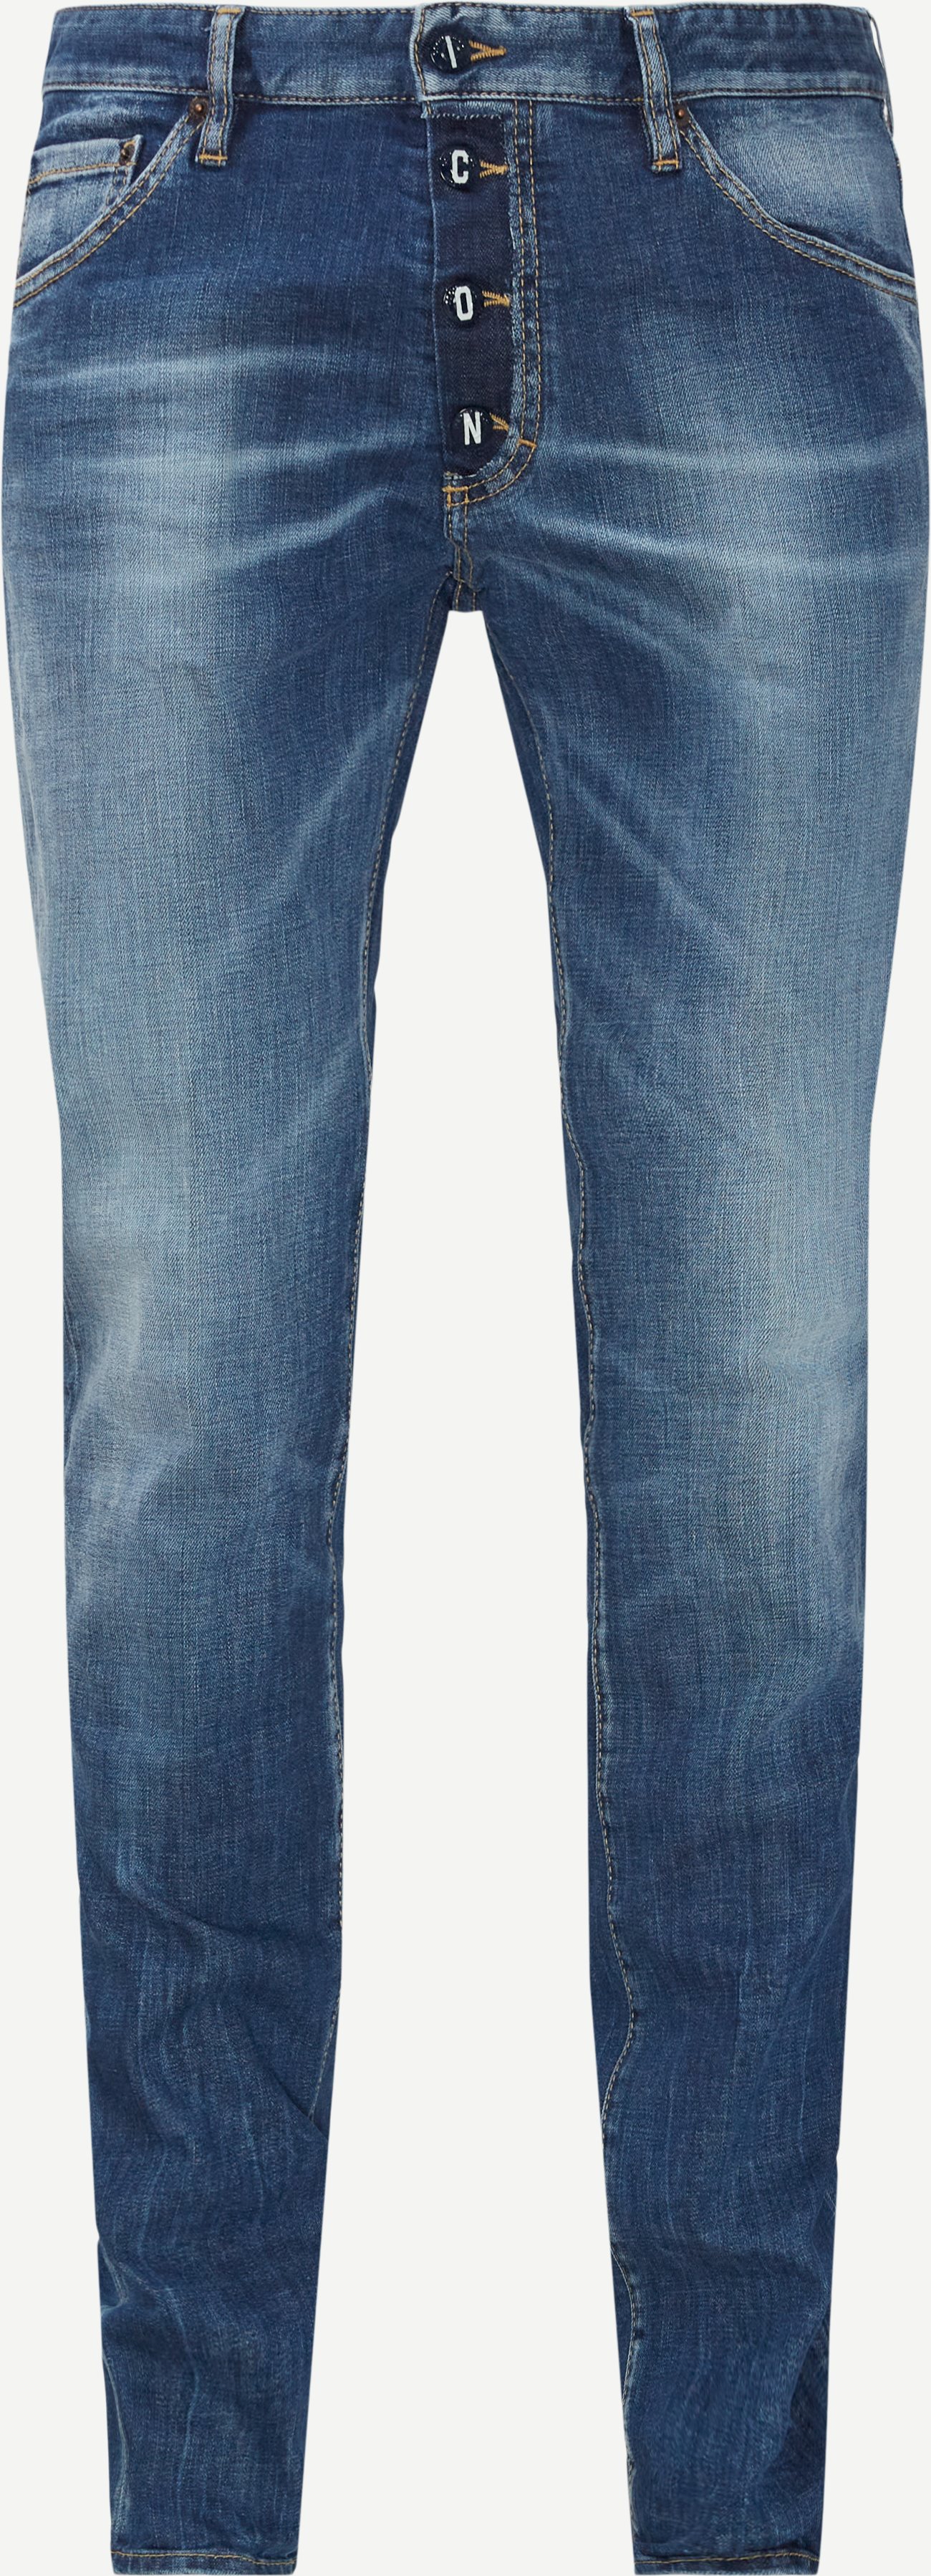 Be Icon Cool Guy Jeans - Jeans - Skinny fit - Denim